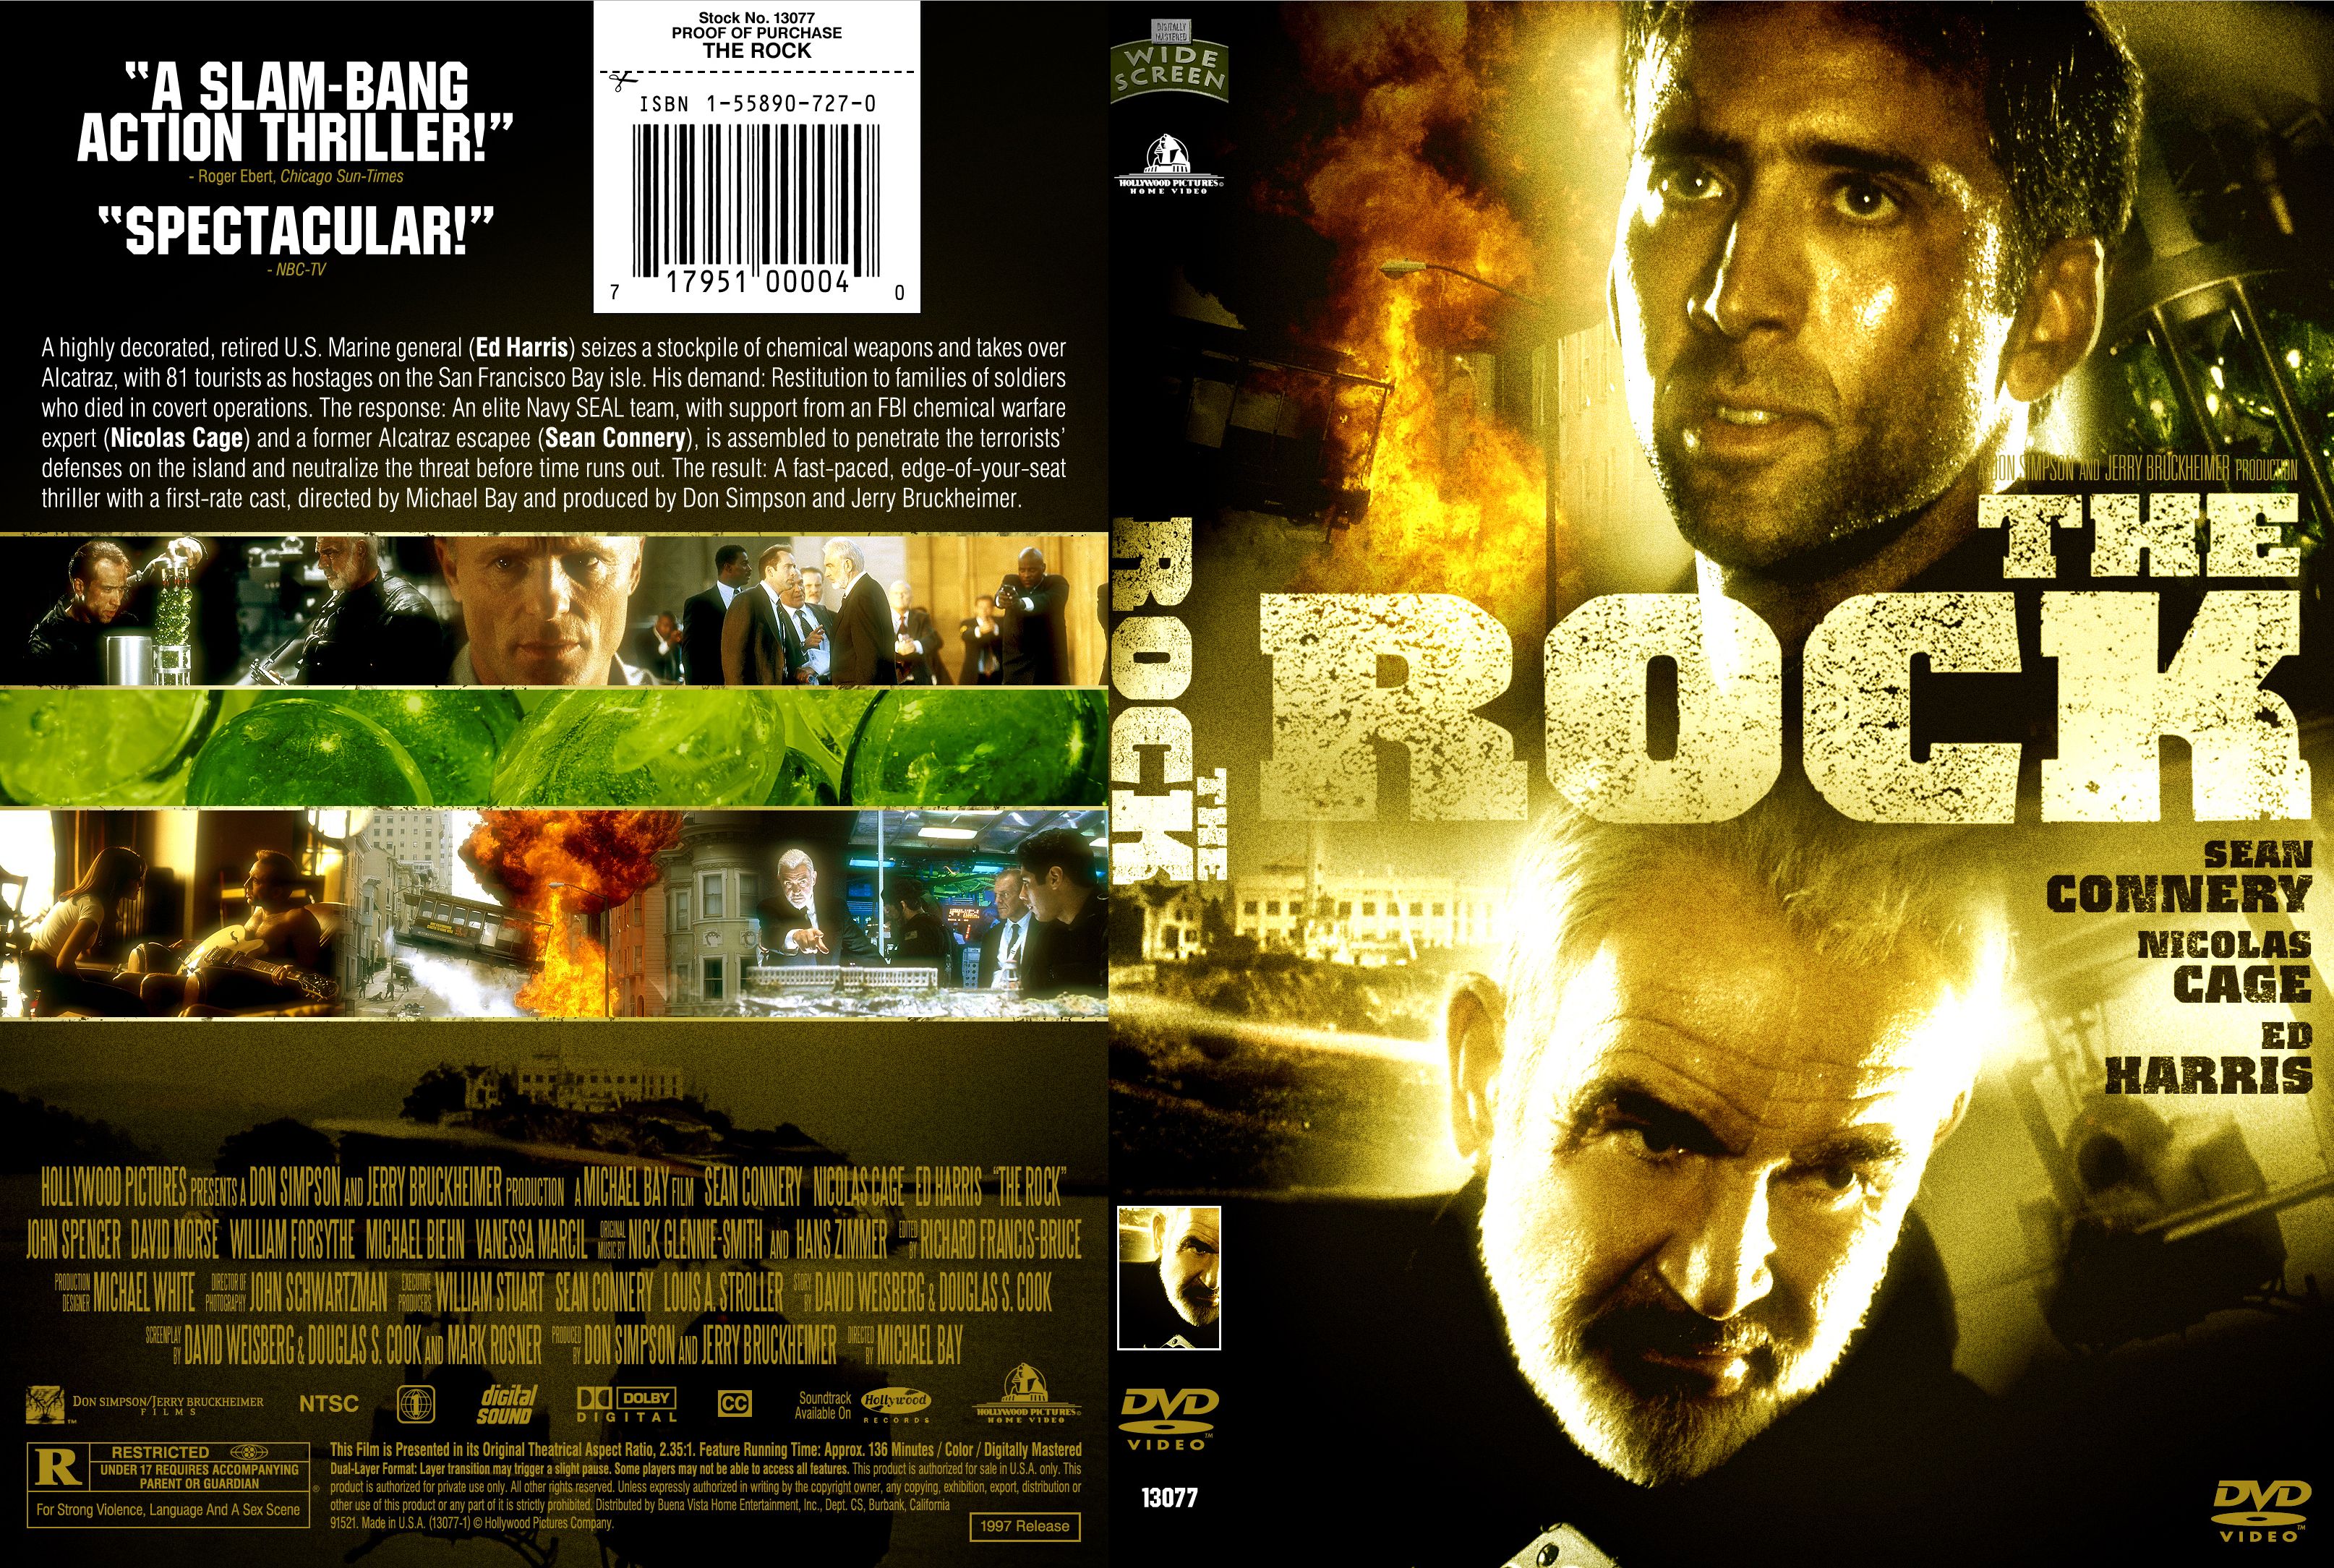 The Rock - US DVD Cover
Keywords: ;media_cover